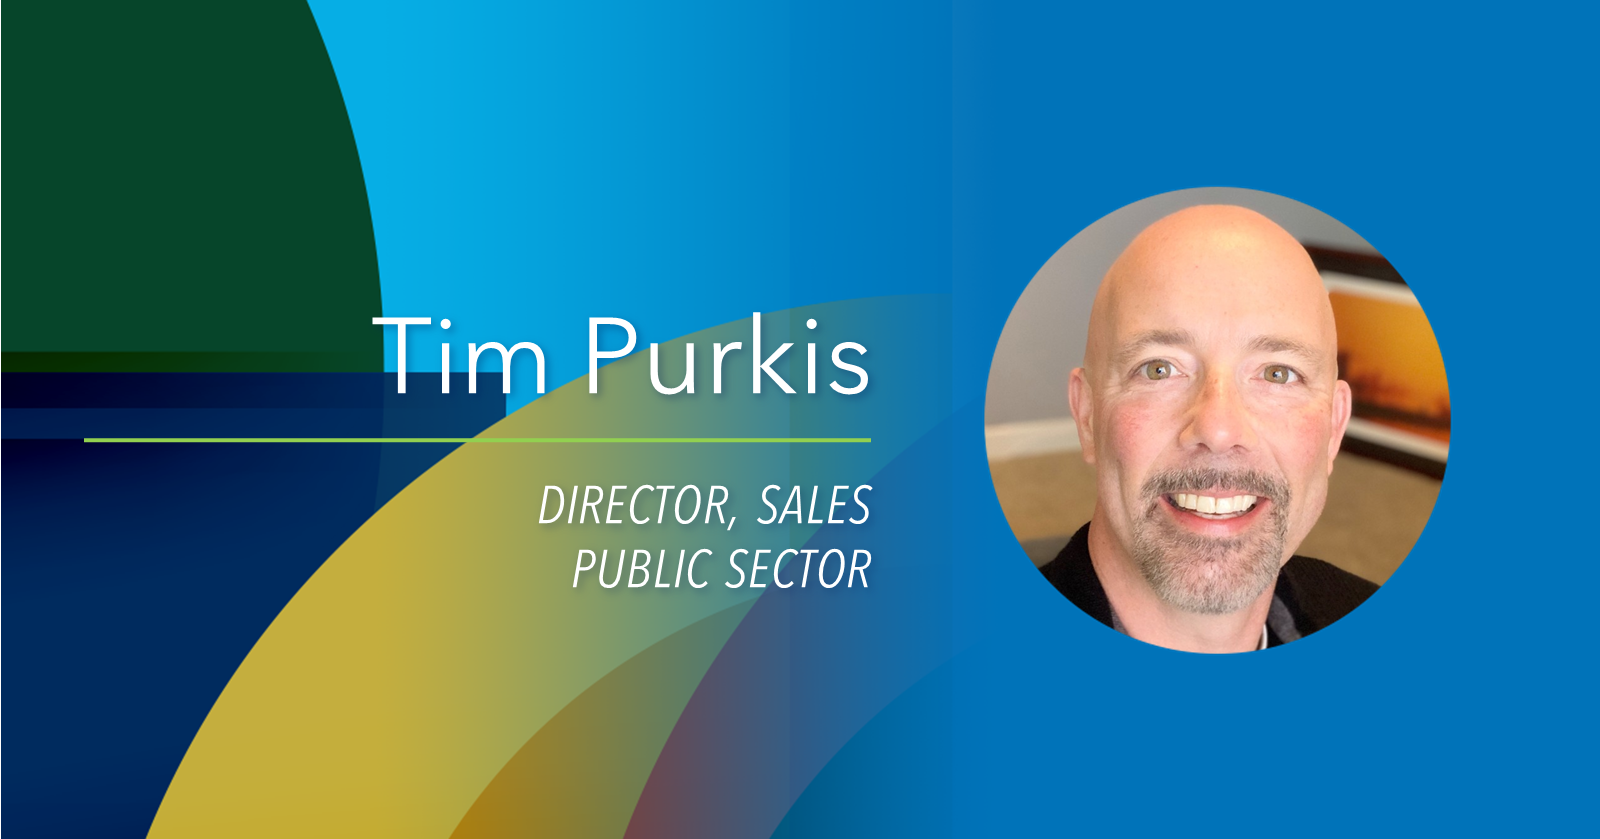 Empyrean Welcomes Tim Purkis as Director, Sales – Public Sector to Their Growing Sales Team